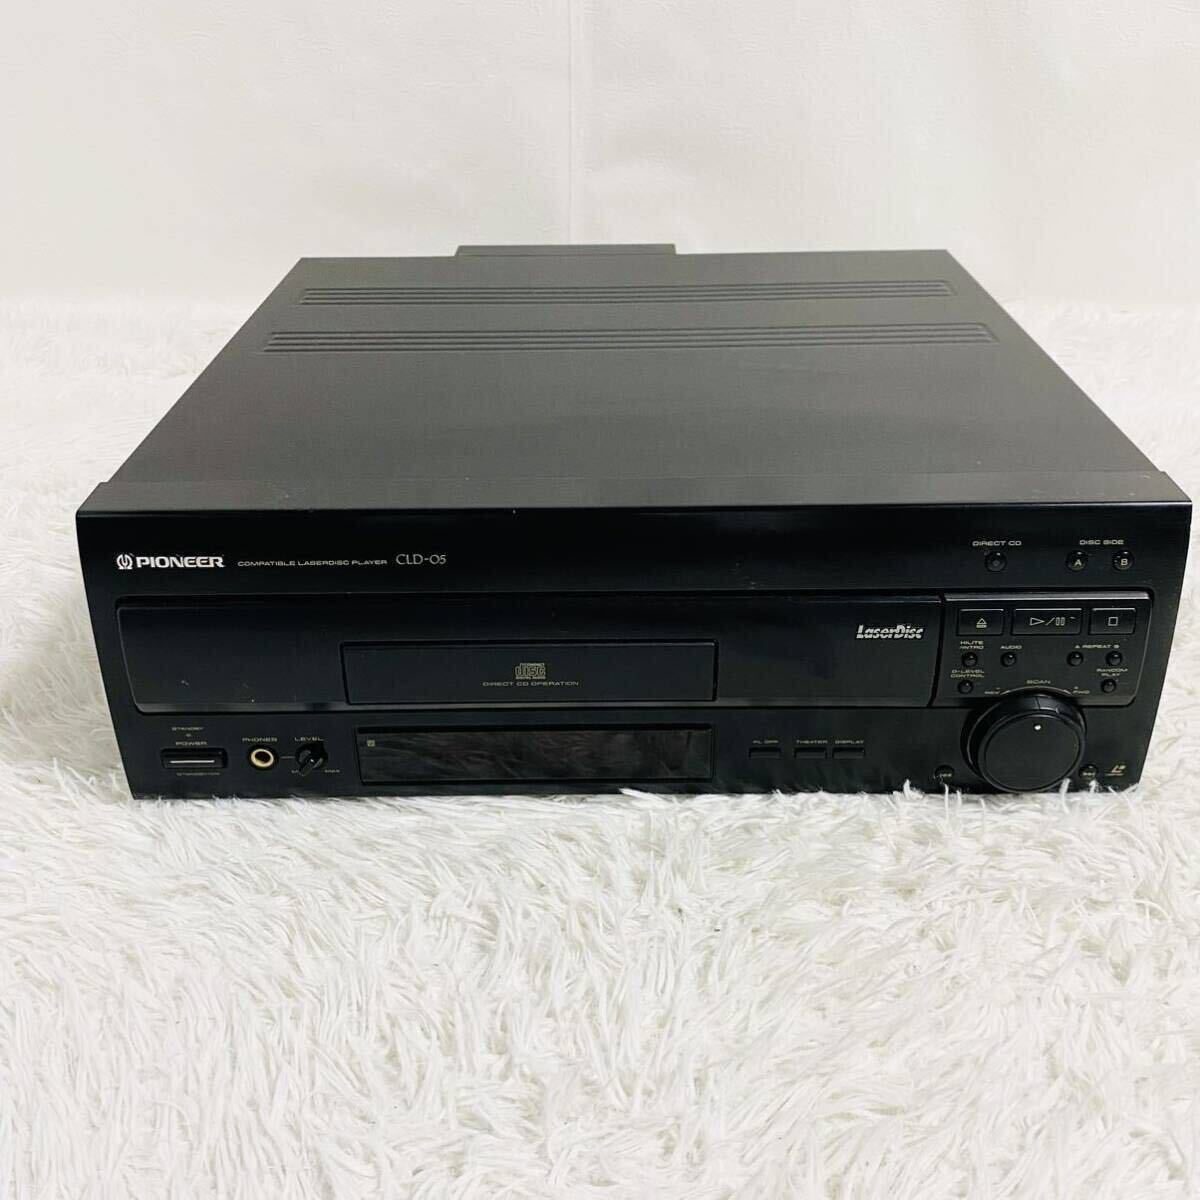 [ Junk ] Pioneer Pioneer CD/LD navy blue pie bru player CLD-05 electrification verification only 